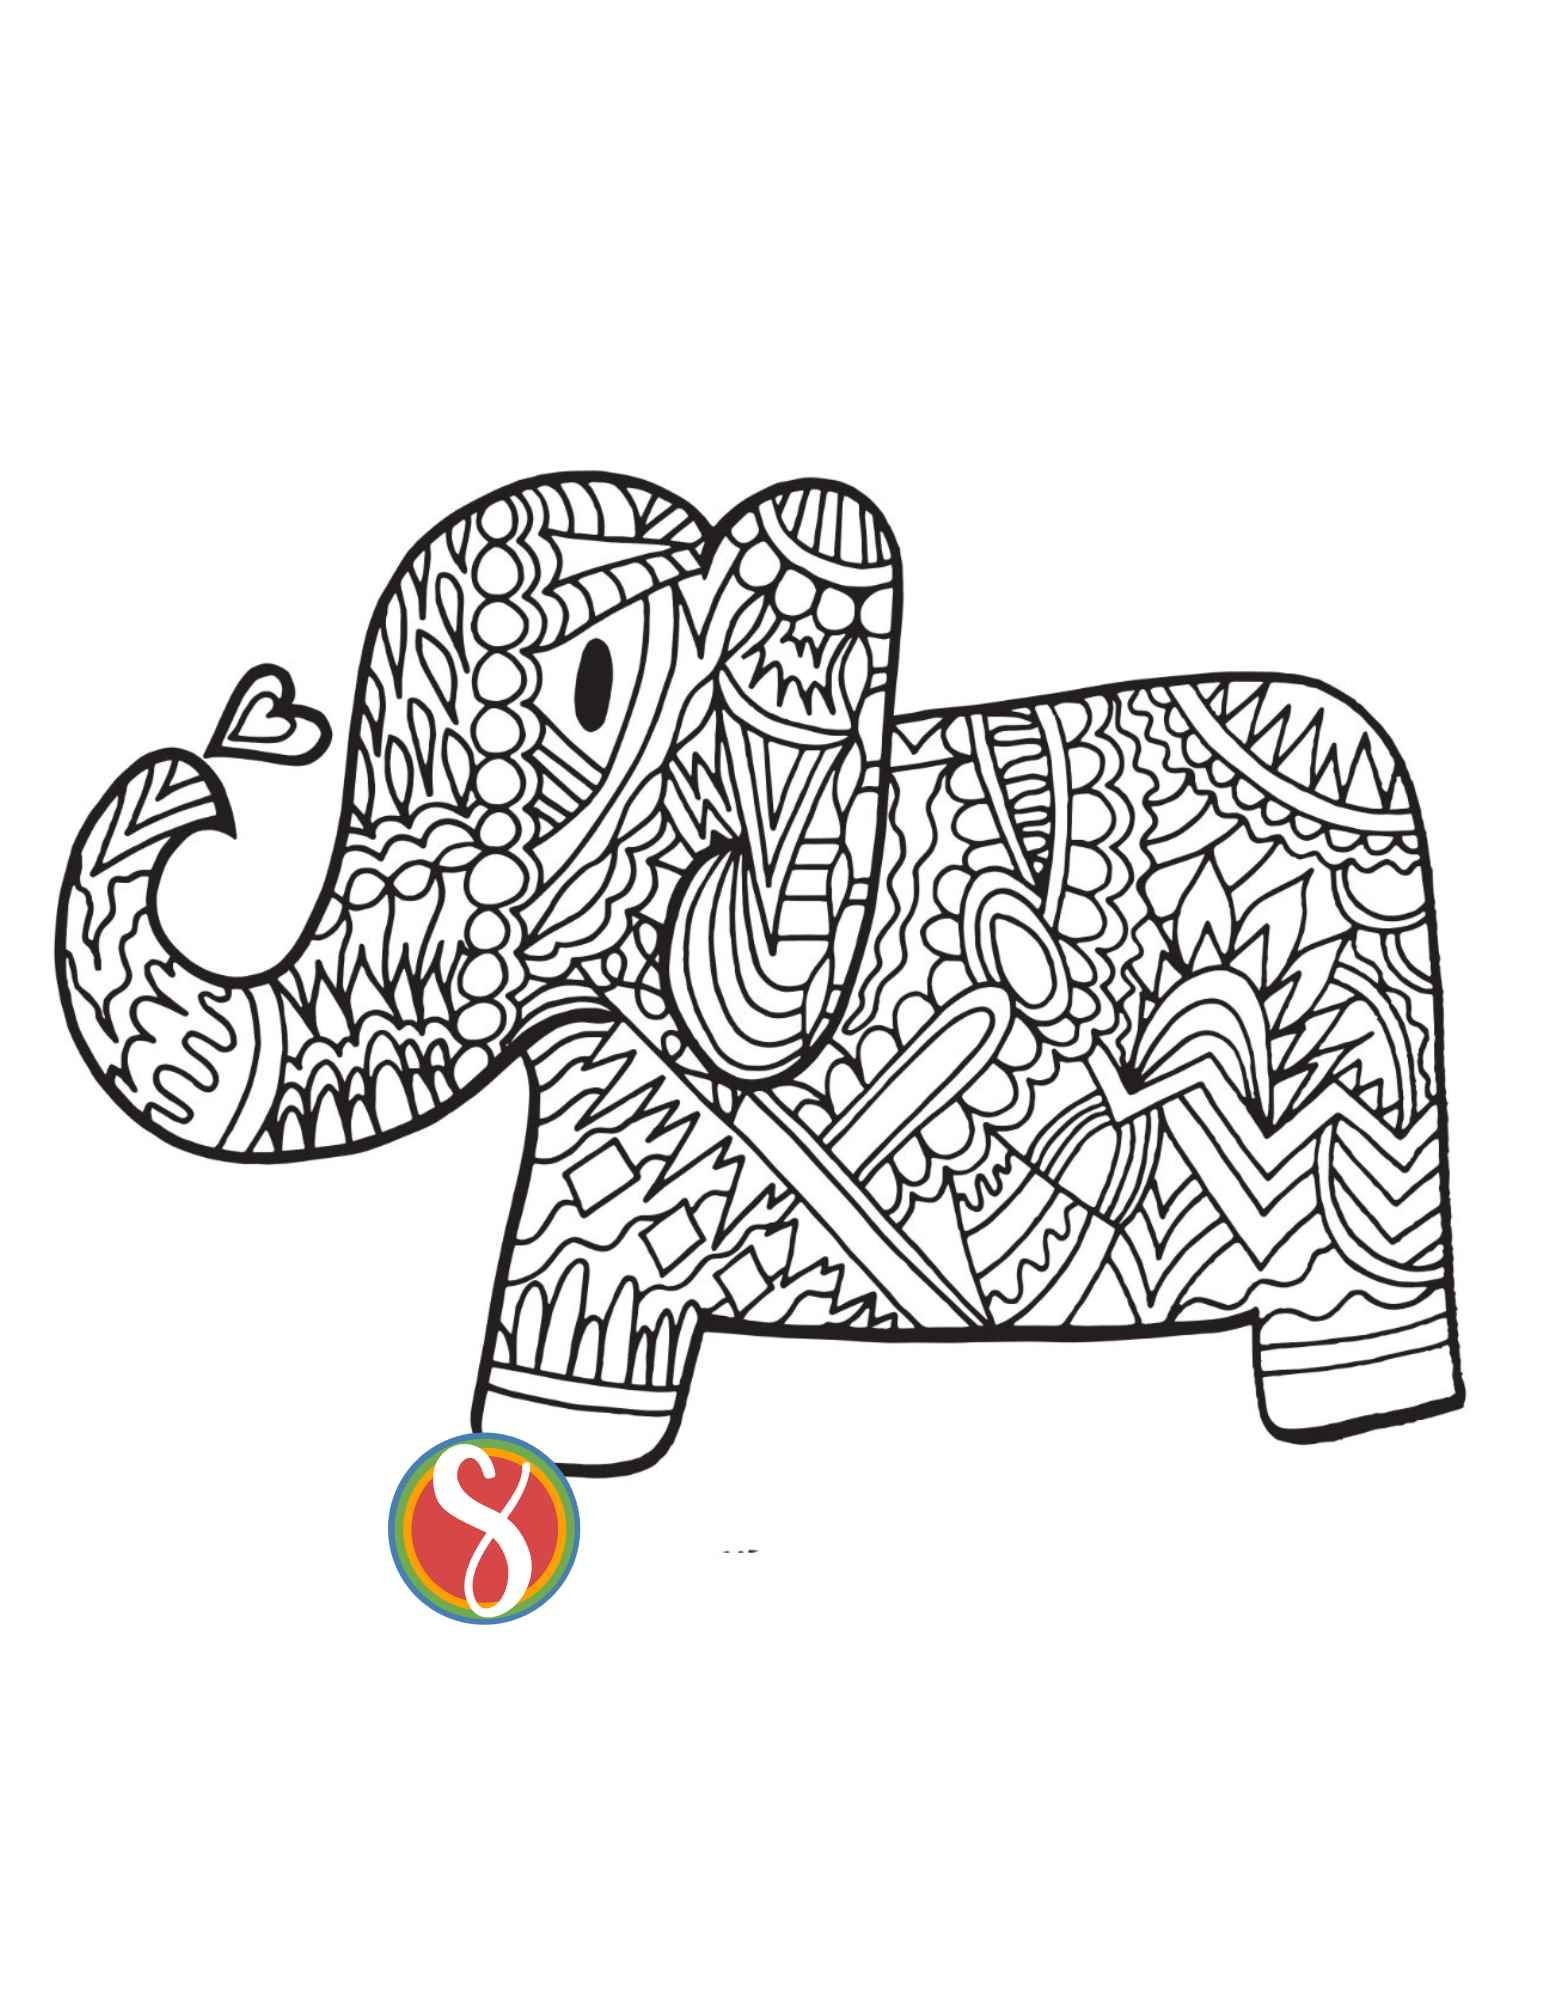 profile of a baby elephant coloring page, elephant full of doodles to color